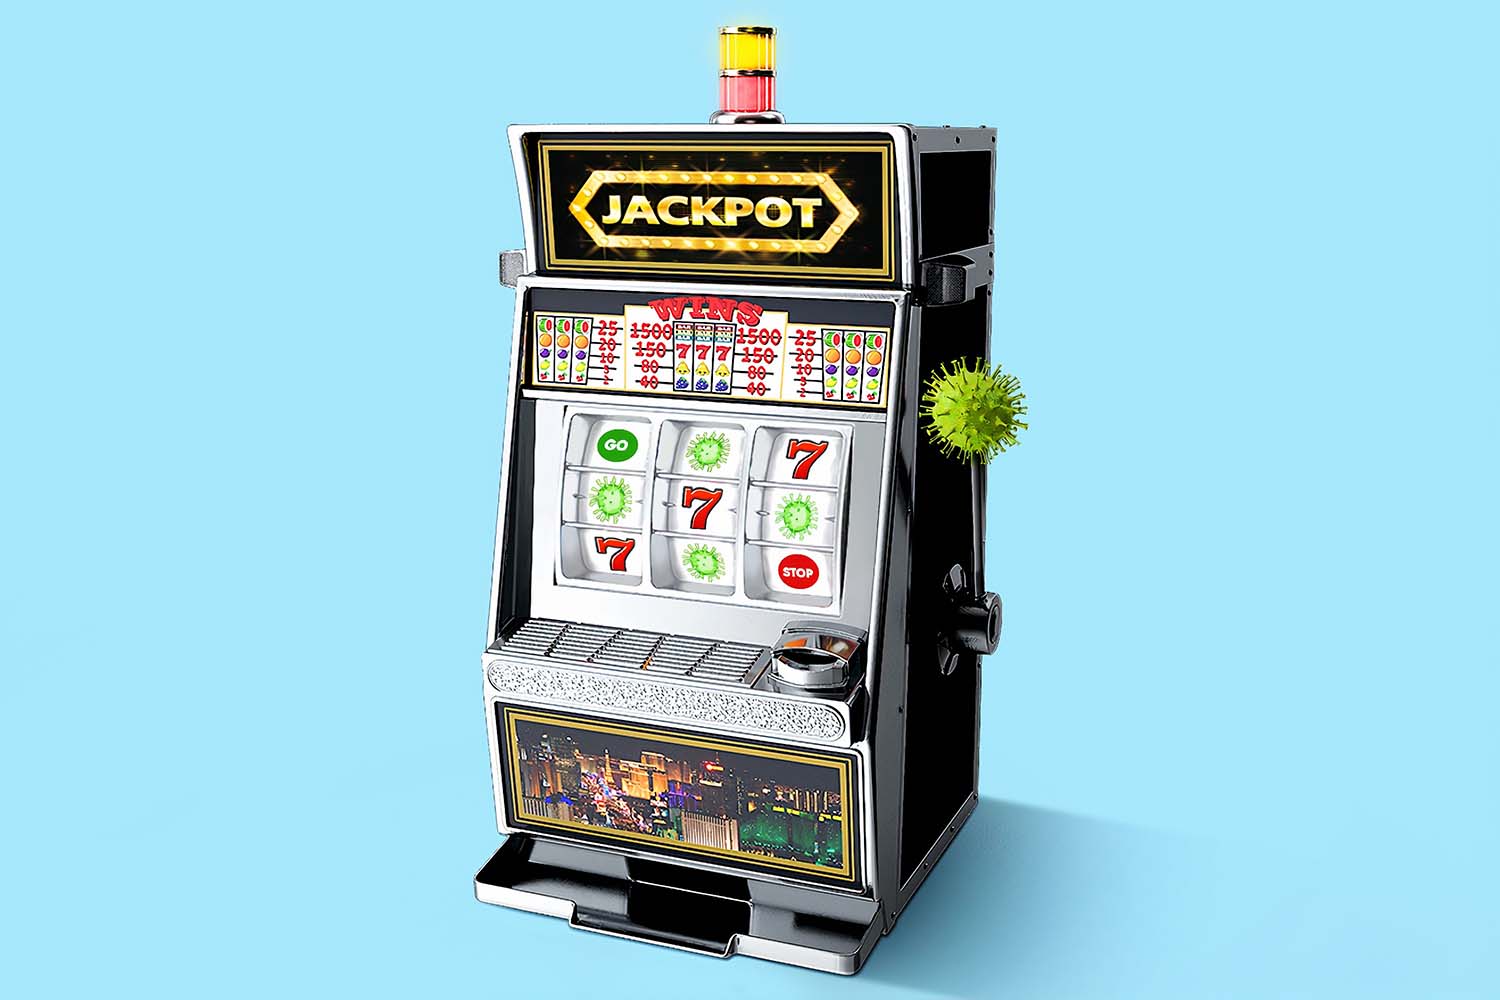 Are Online Slots Finally Catching Up Design Wise?